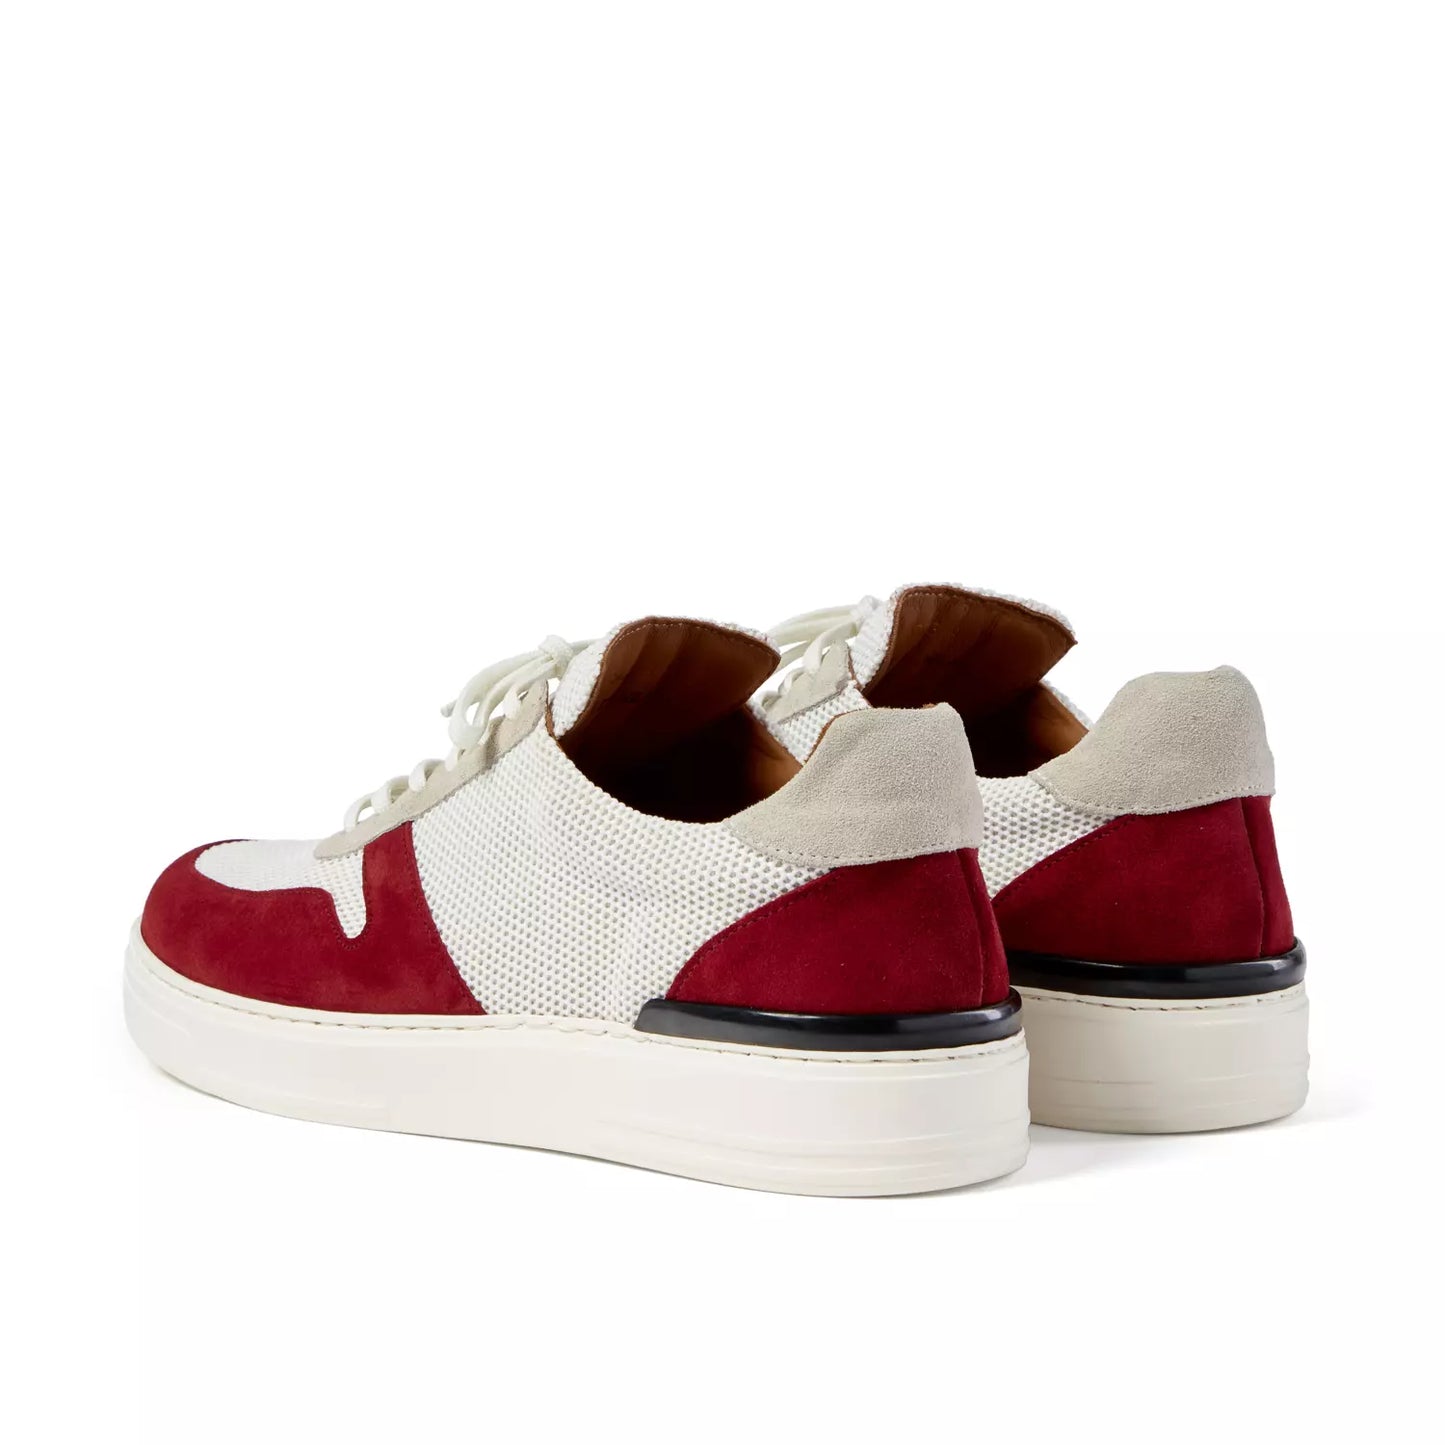 Duke and Dexter Ritchie Rio sneakers for men extra light comfortable White and Burgundy back view